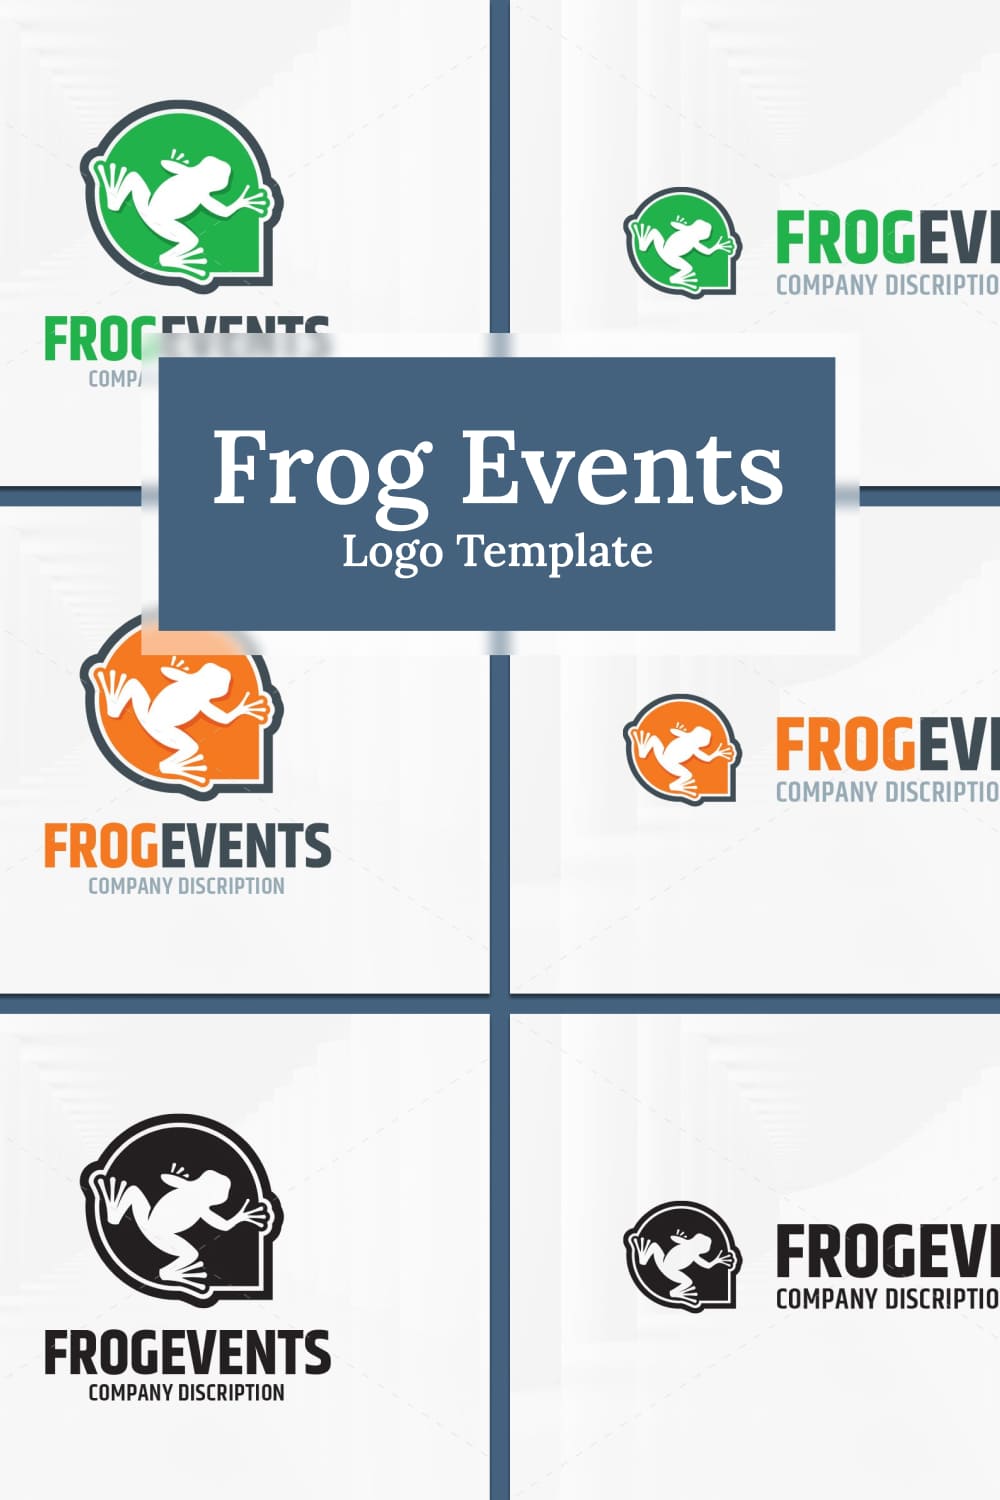 Frog events logo template - pinterest image preview.